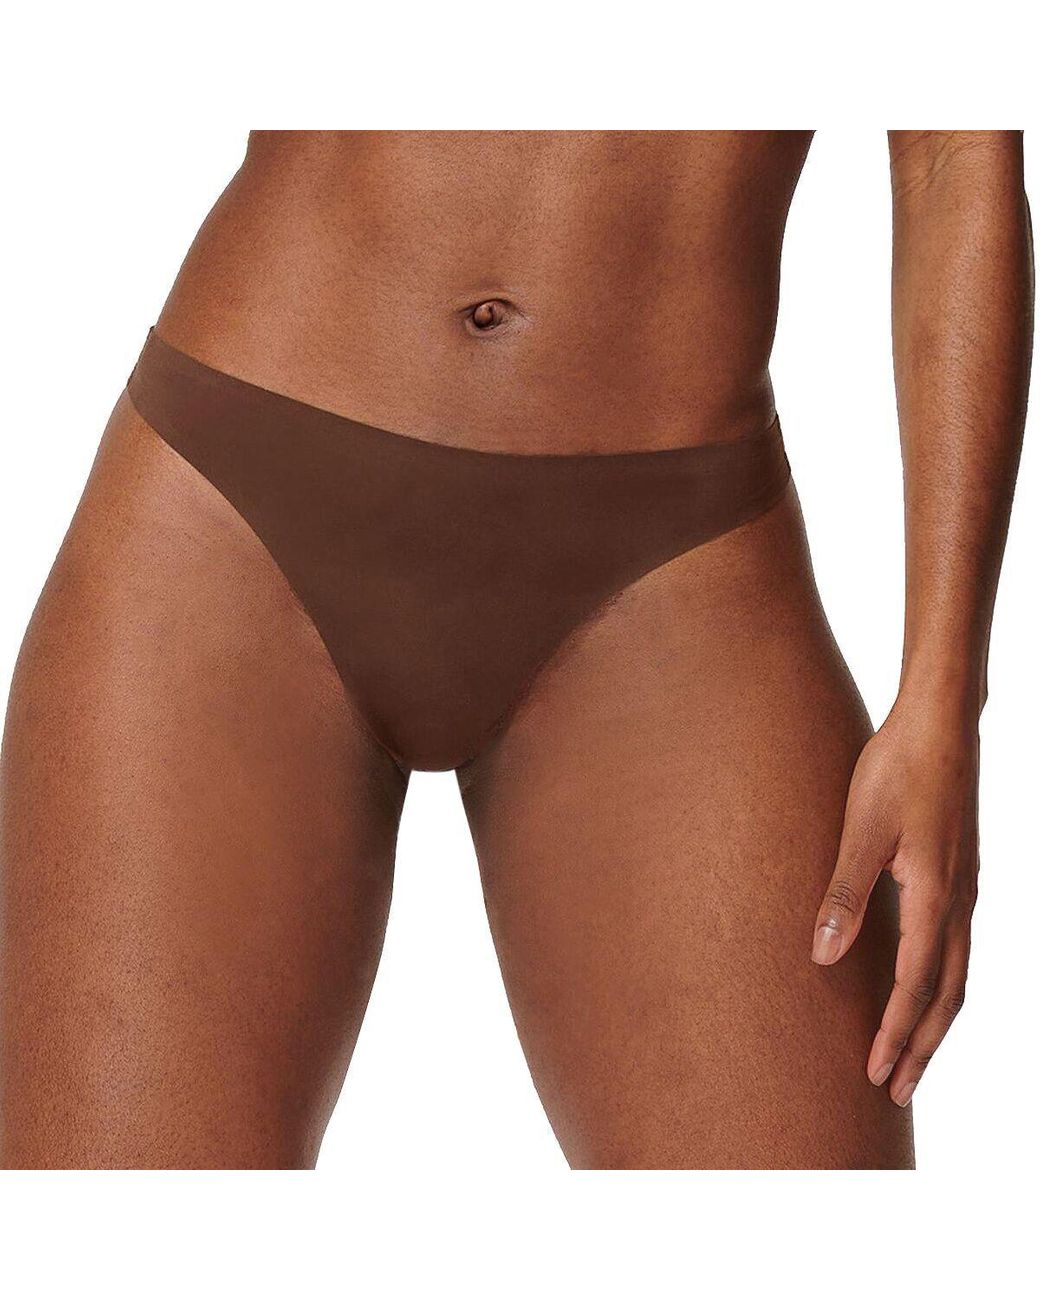 Sweaty Betty Barely There Thong Underwear in Brown